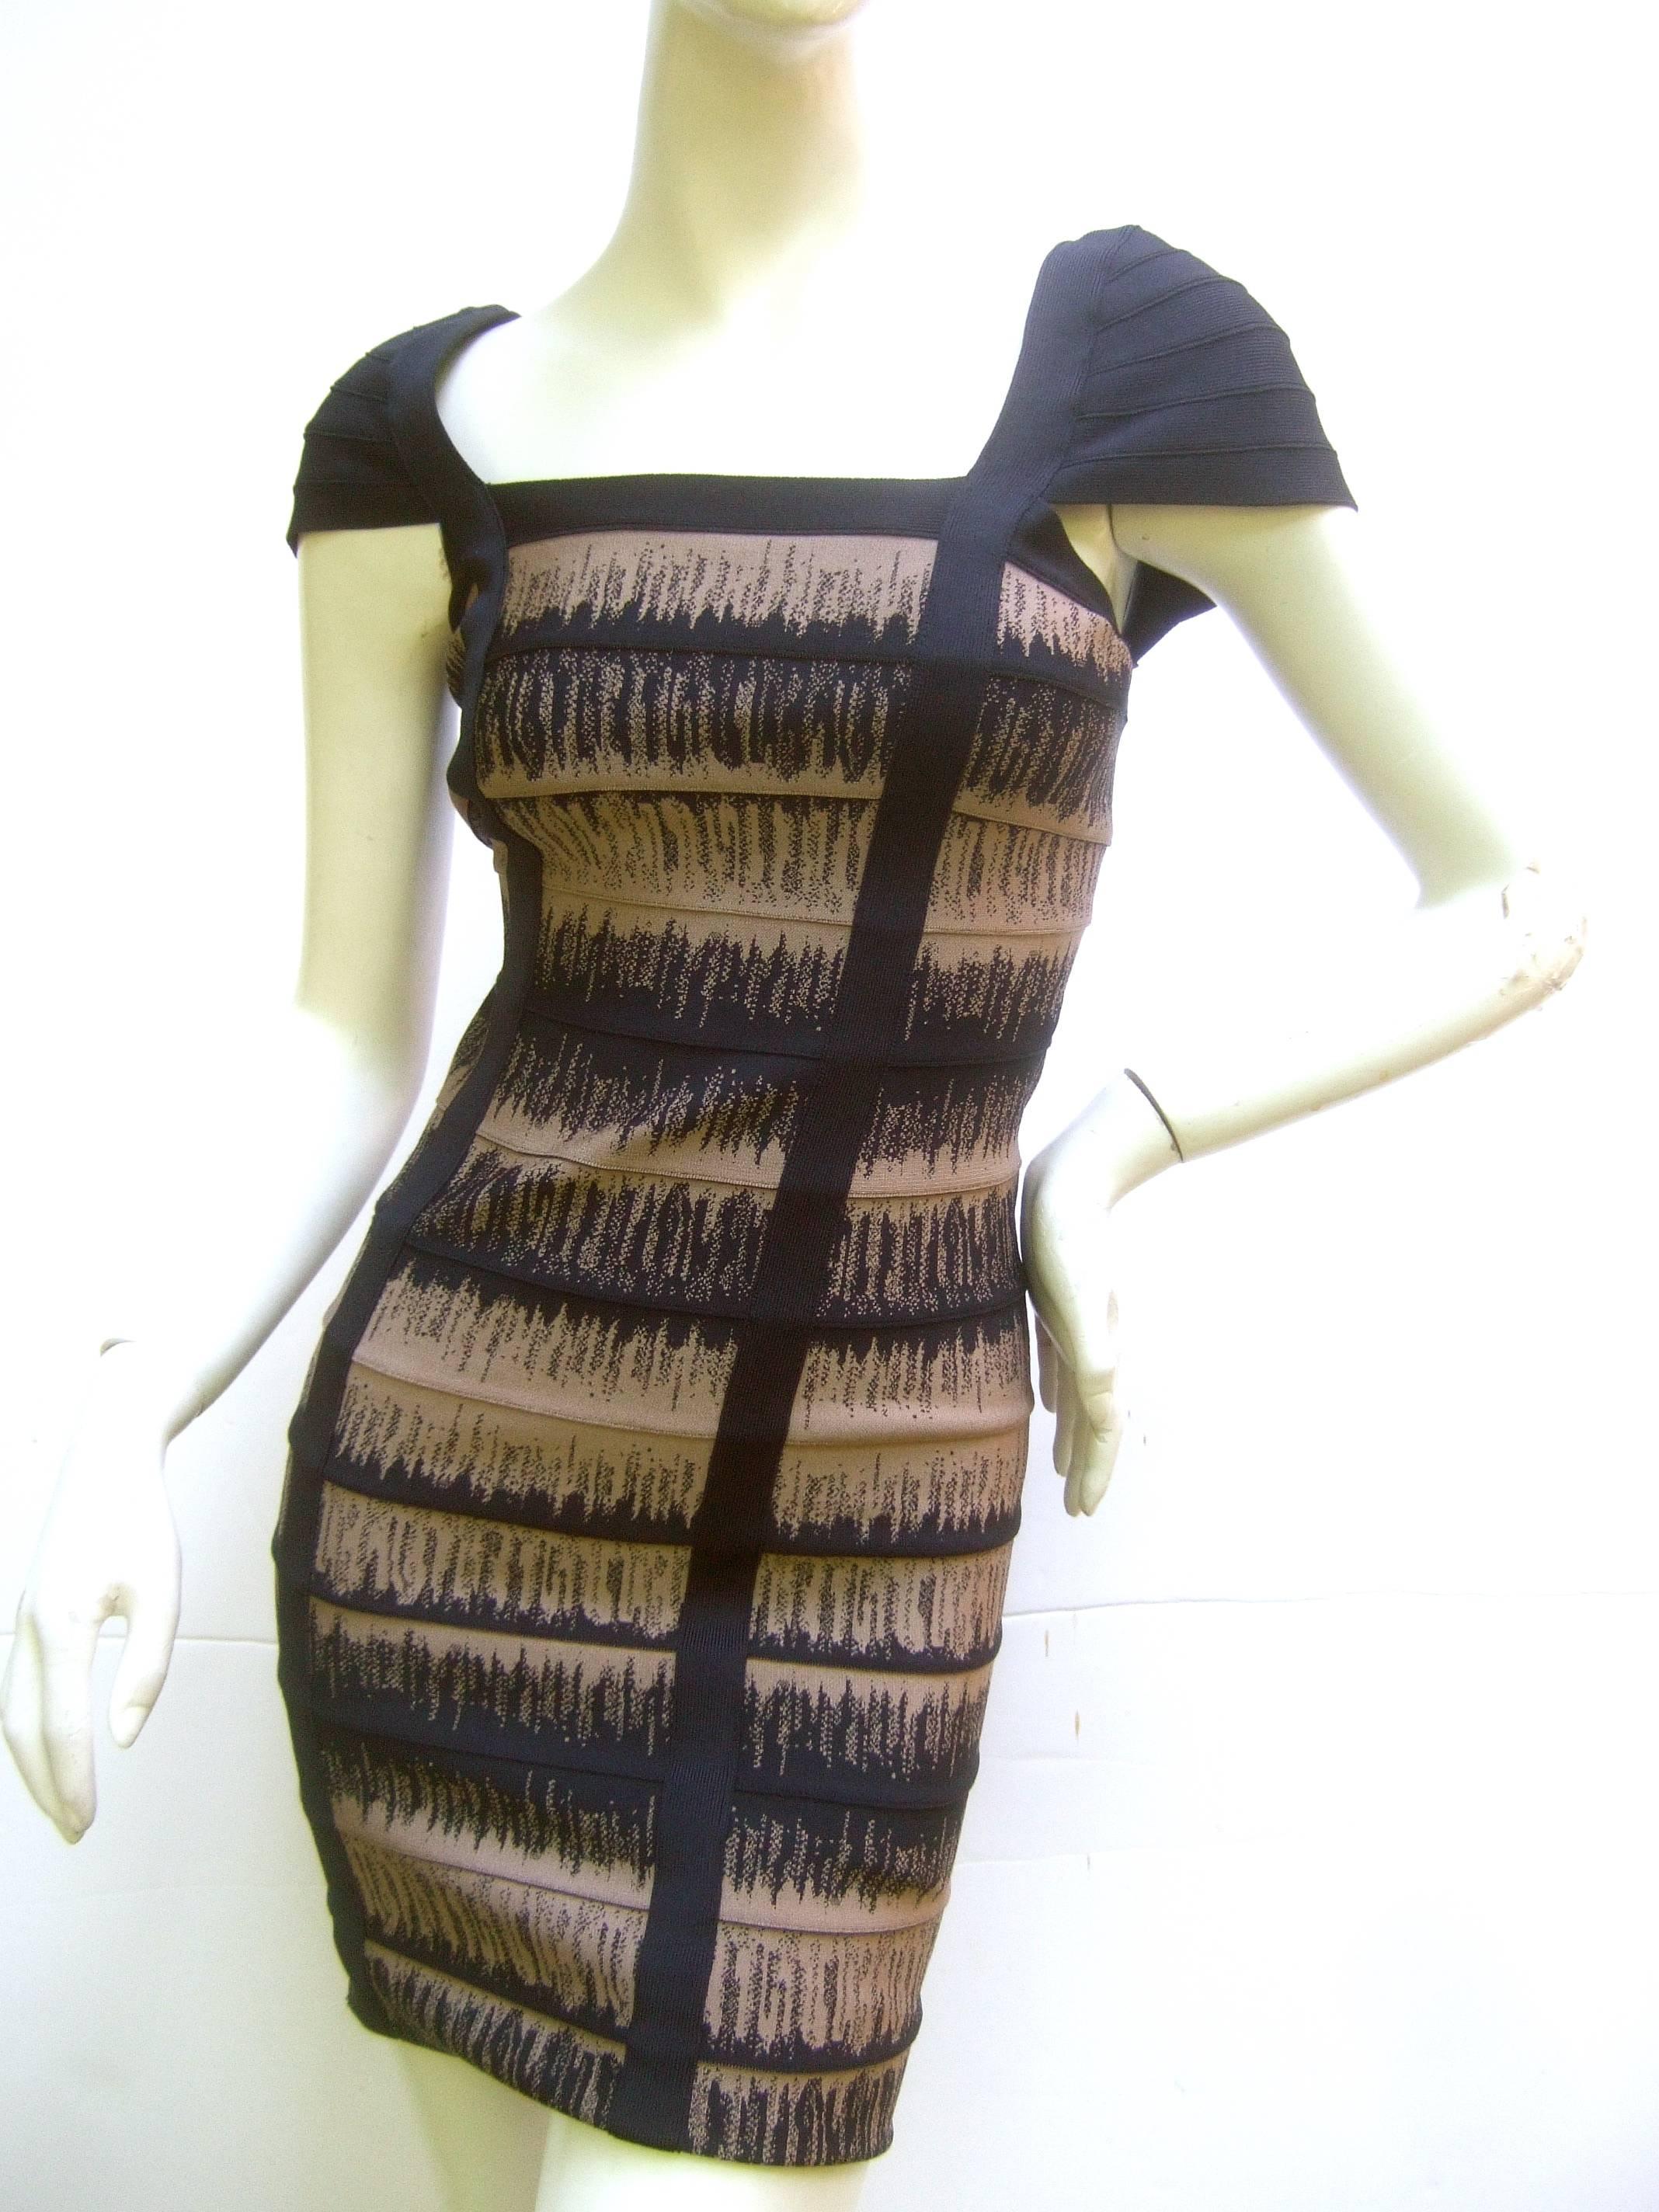 Herve Leger Iconic knit bandage dress Size S 
The sexy dress is designed with his signature 
clingy knit horizontal bands with contrasting  
horizontal bands 

The knit bands are a combination of dark blue and
beige designs. The shoulders are